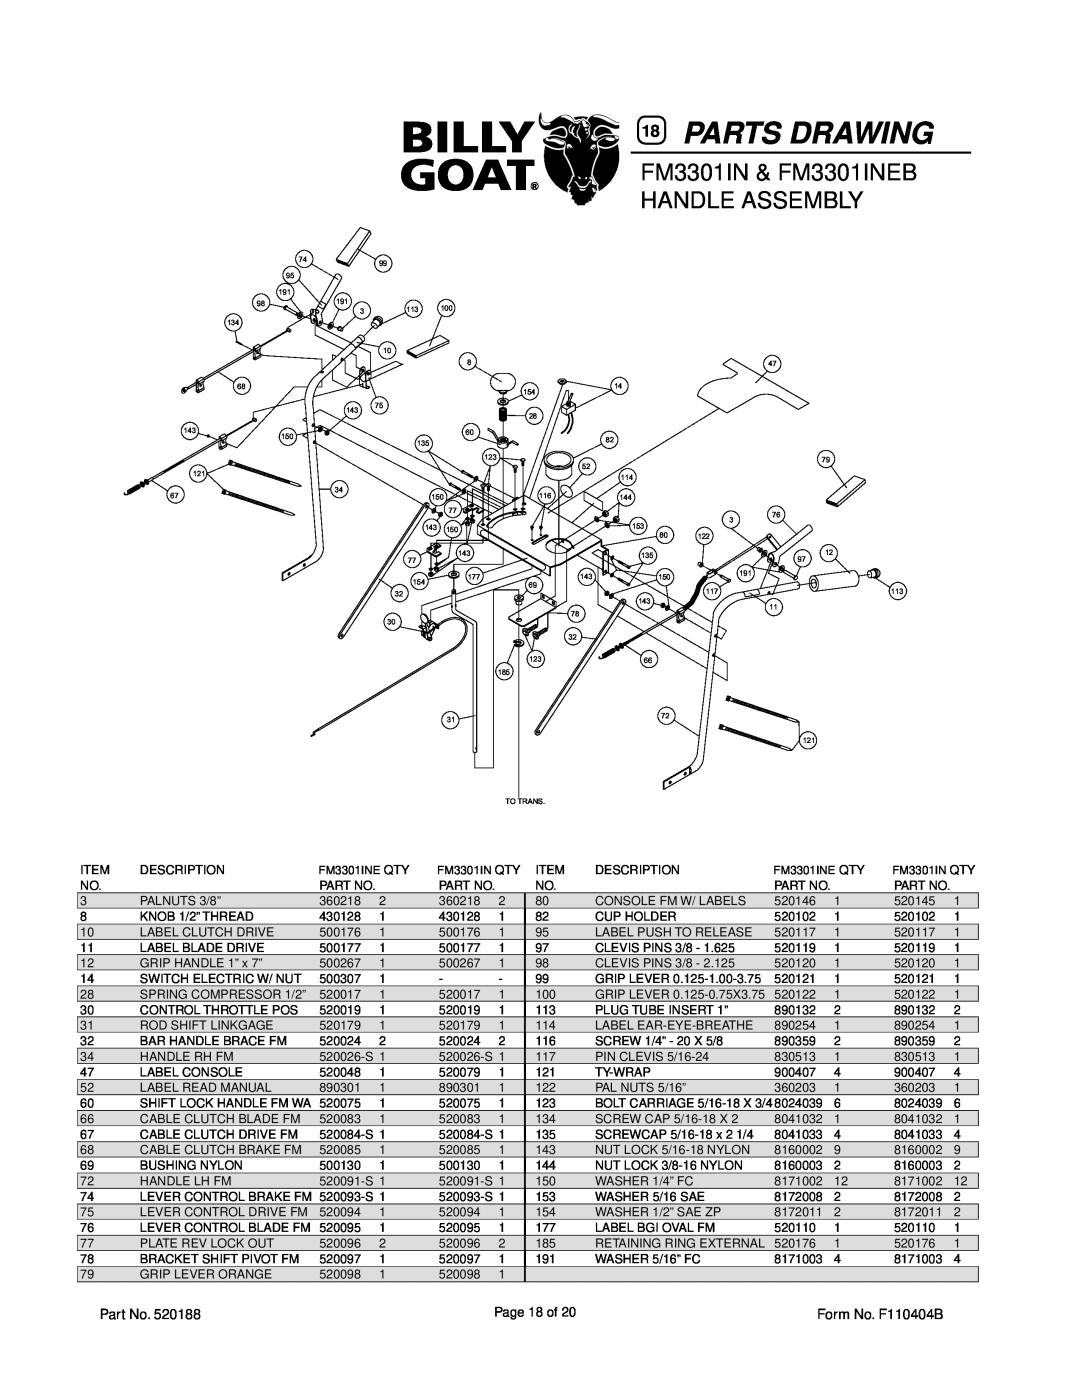 Billy Goat FM3301IN, FM3301INE owner manual Parts Drawing, FM3301IN & FM3301INEB, Handle Assembly 